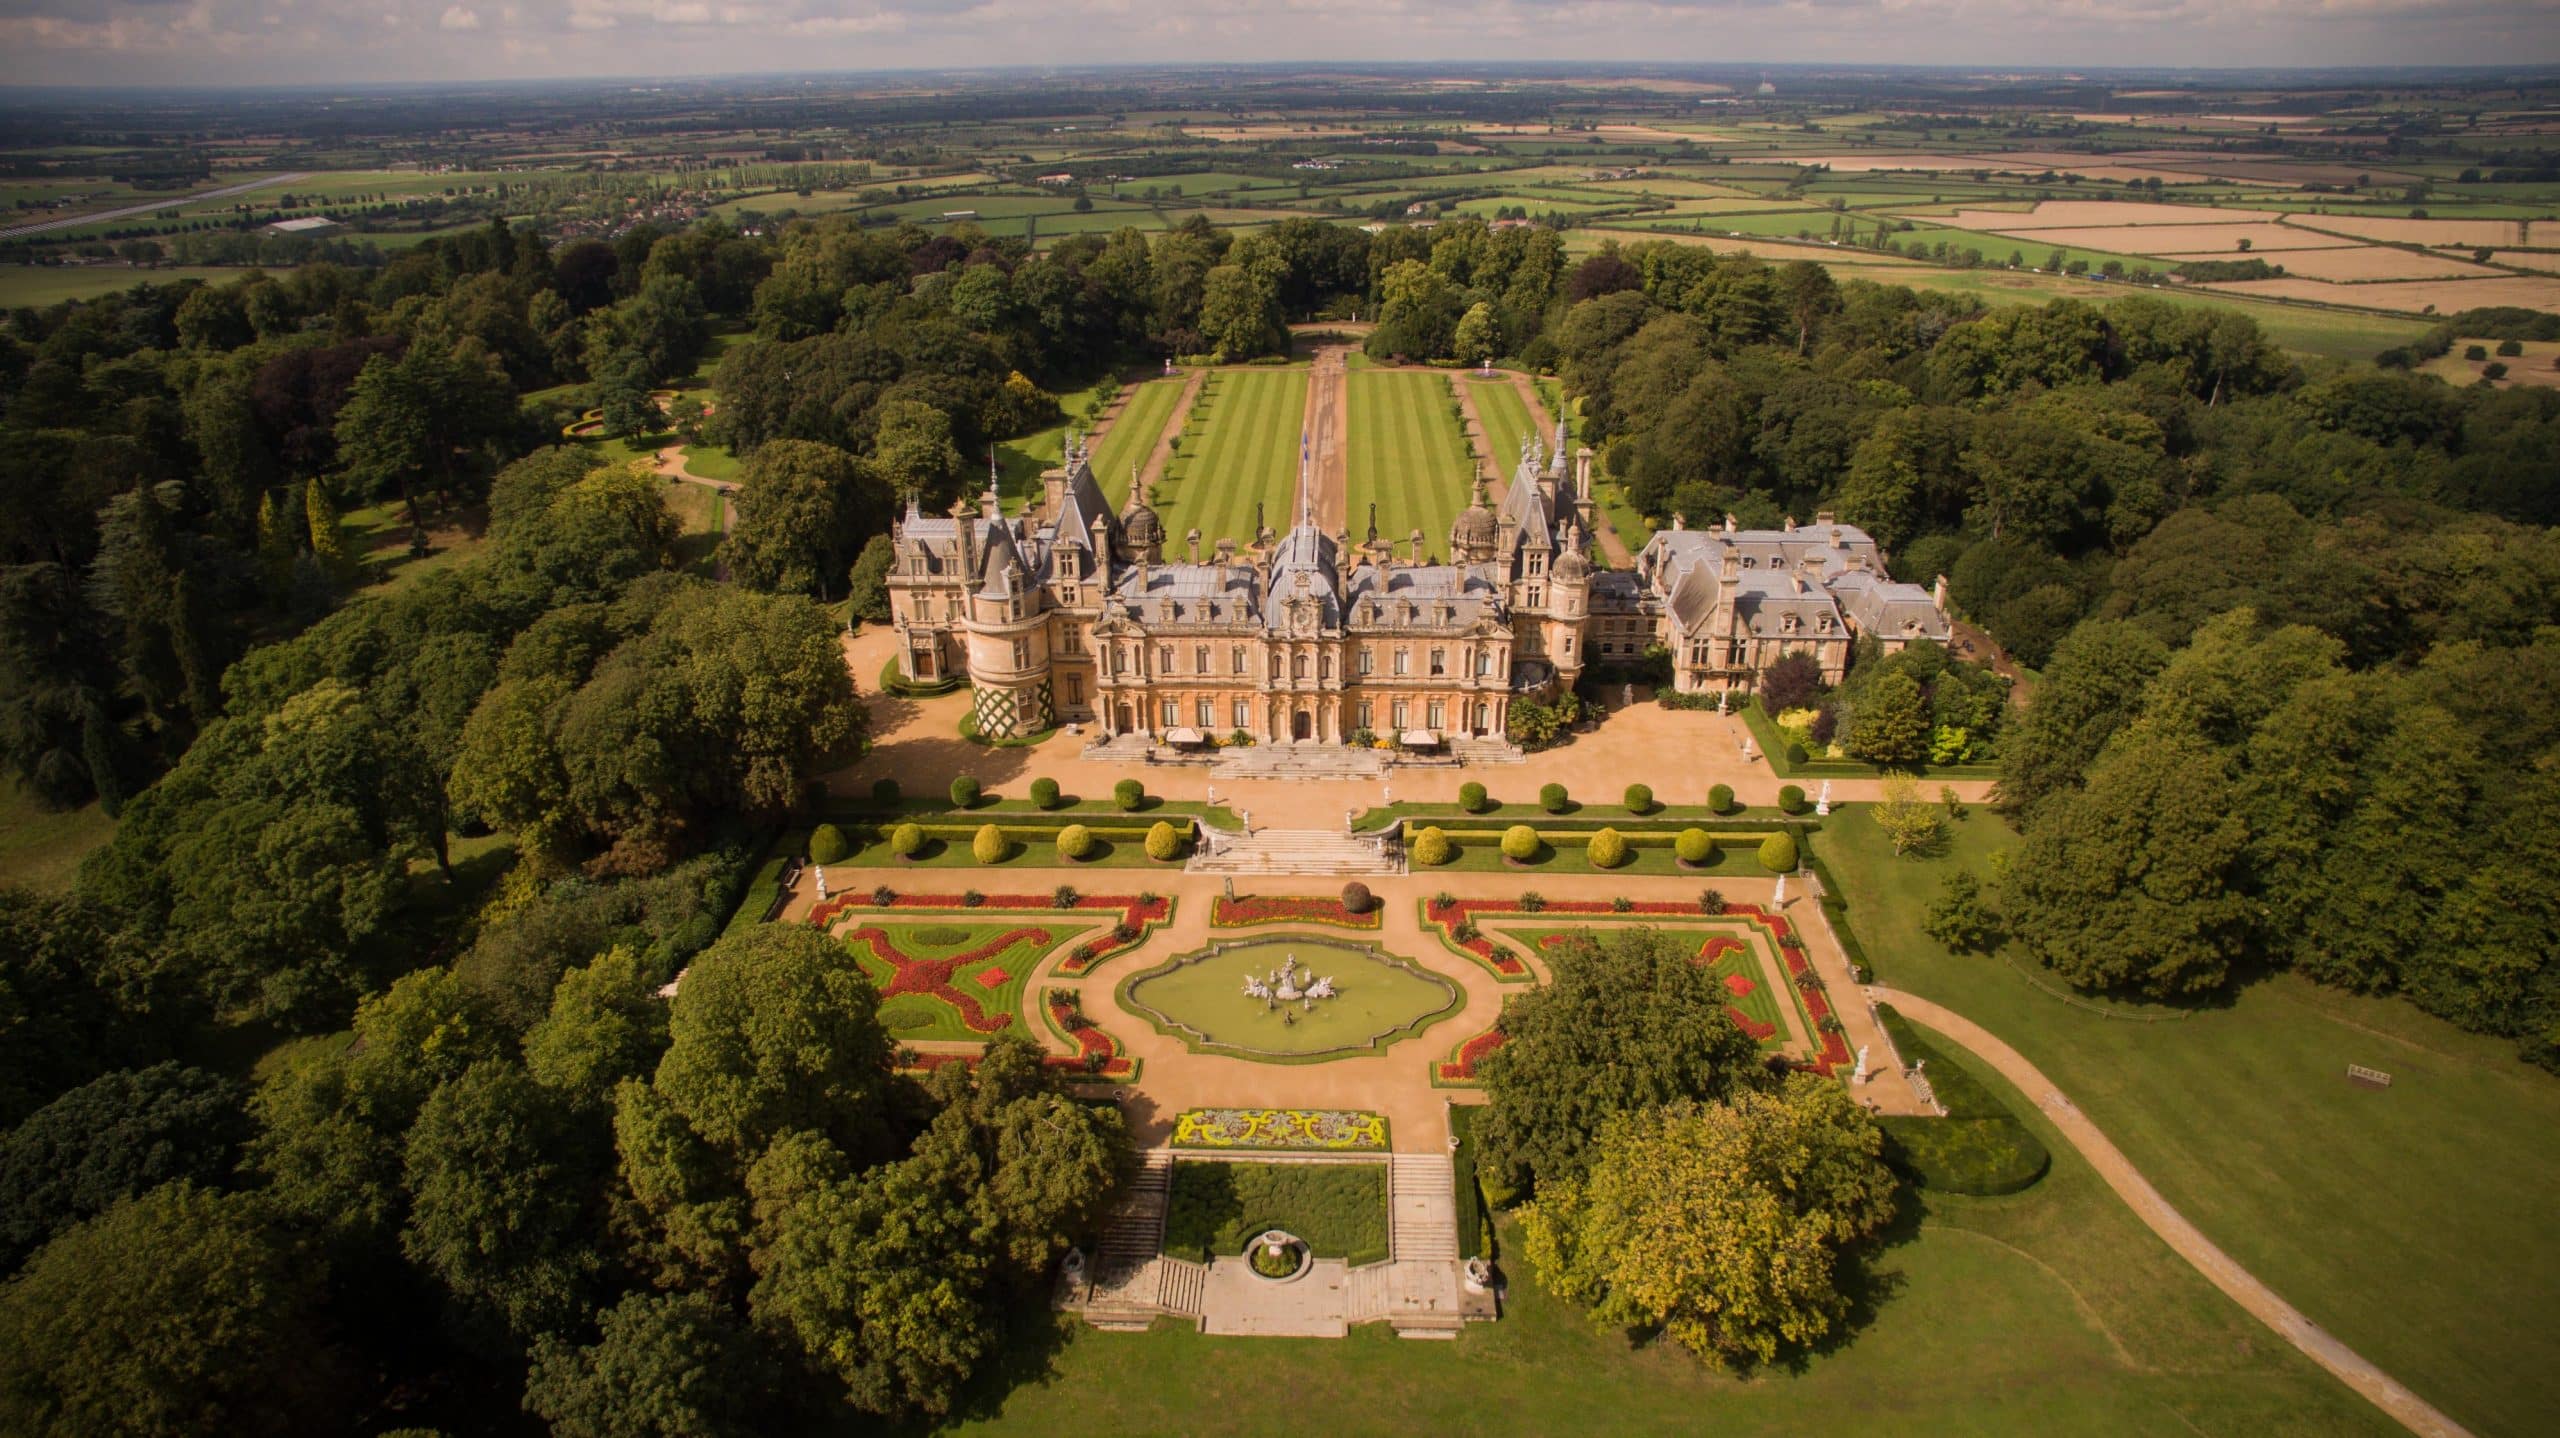 Aerial photograph of England's turreted French chateaux style Waddesdon Manor and formal gardens 